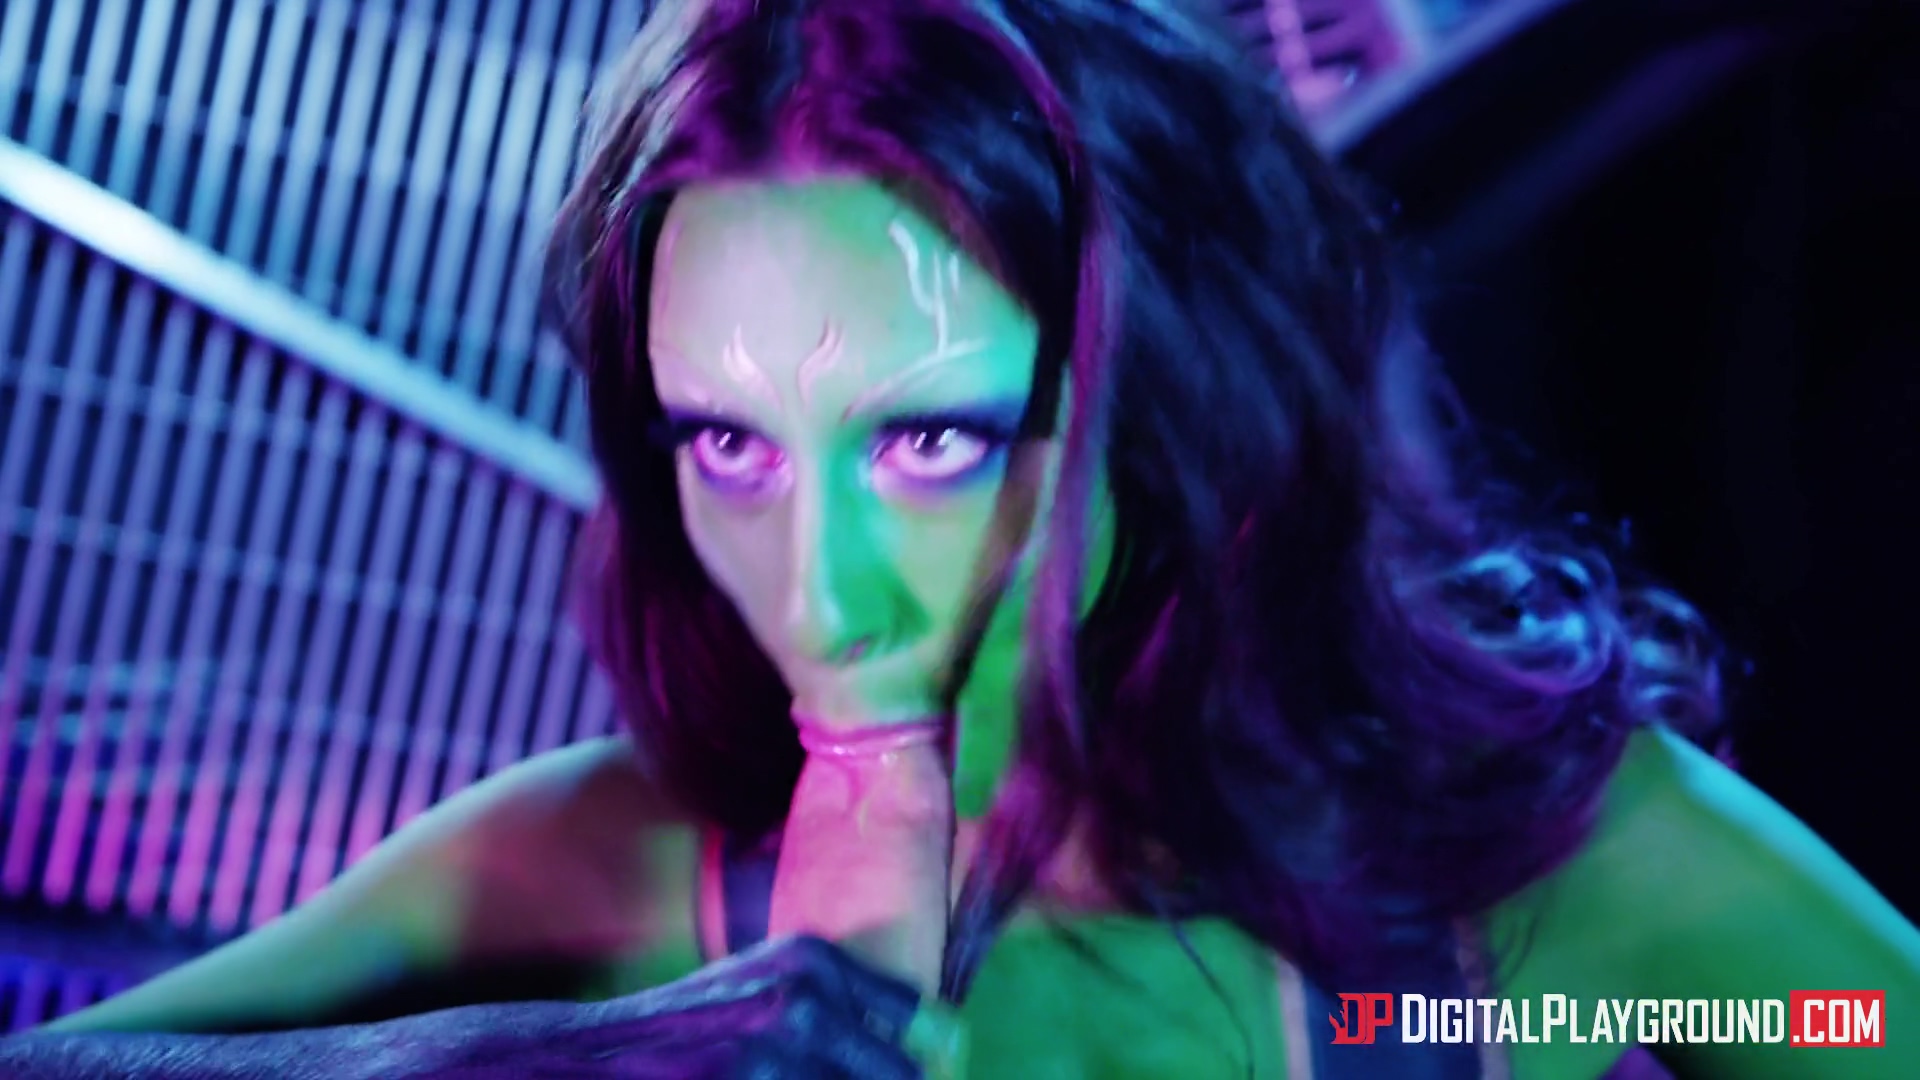 Galaxy Sex Video - Peter And Gamora Saved The Galaxy Once Again Porn Video - VXXX.com